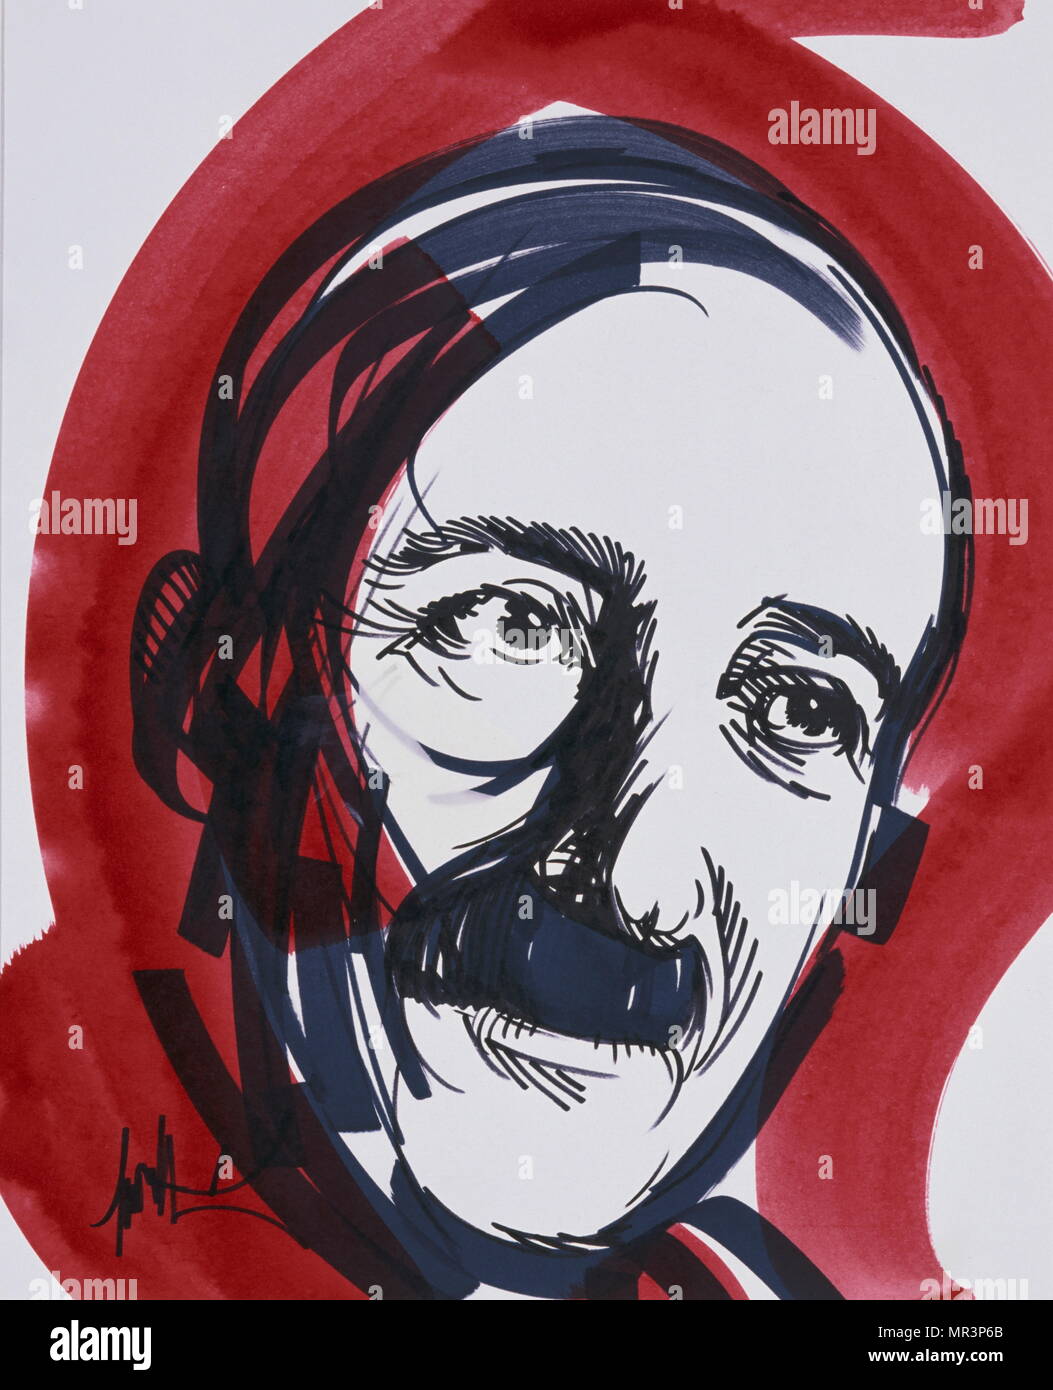 Stefan Zweig (1881 – 1942), Austrian novelist,. Portrait on a poster by Raymond Moretti (1931-2005), a French painter and sculptor. Stock Photo